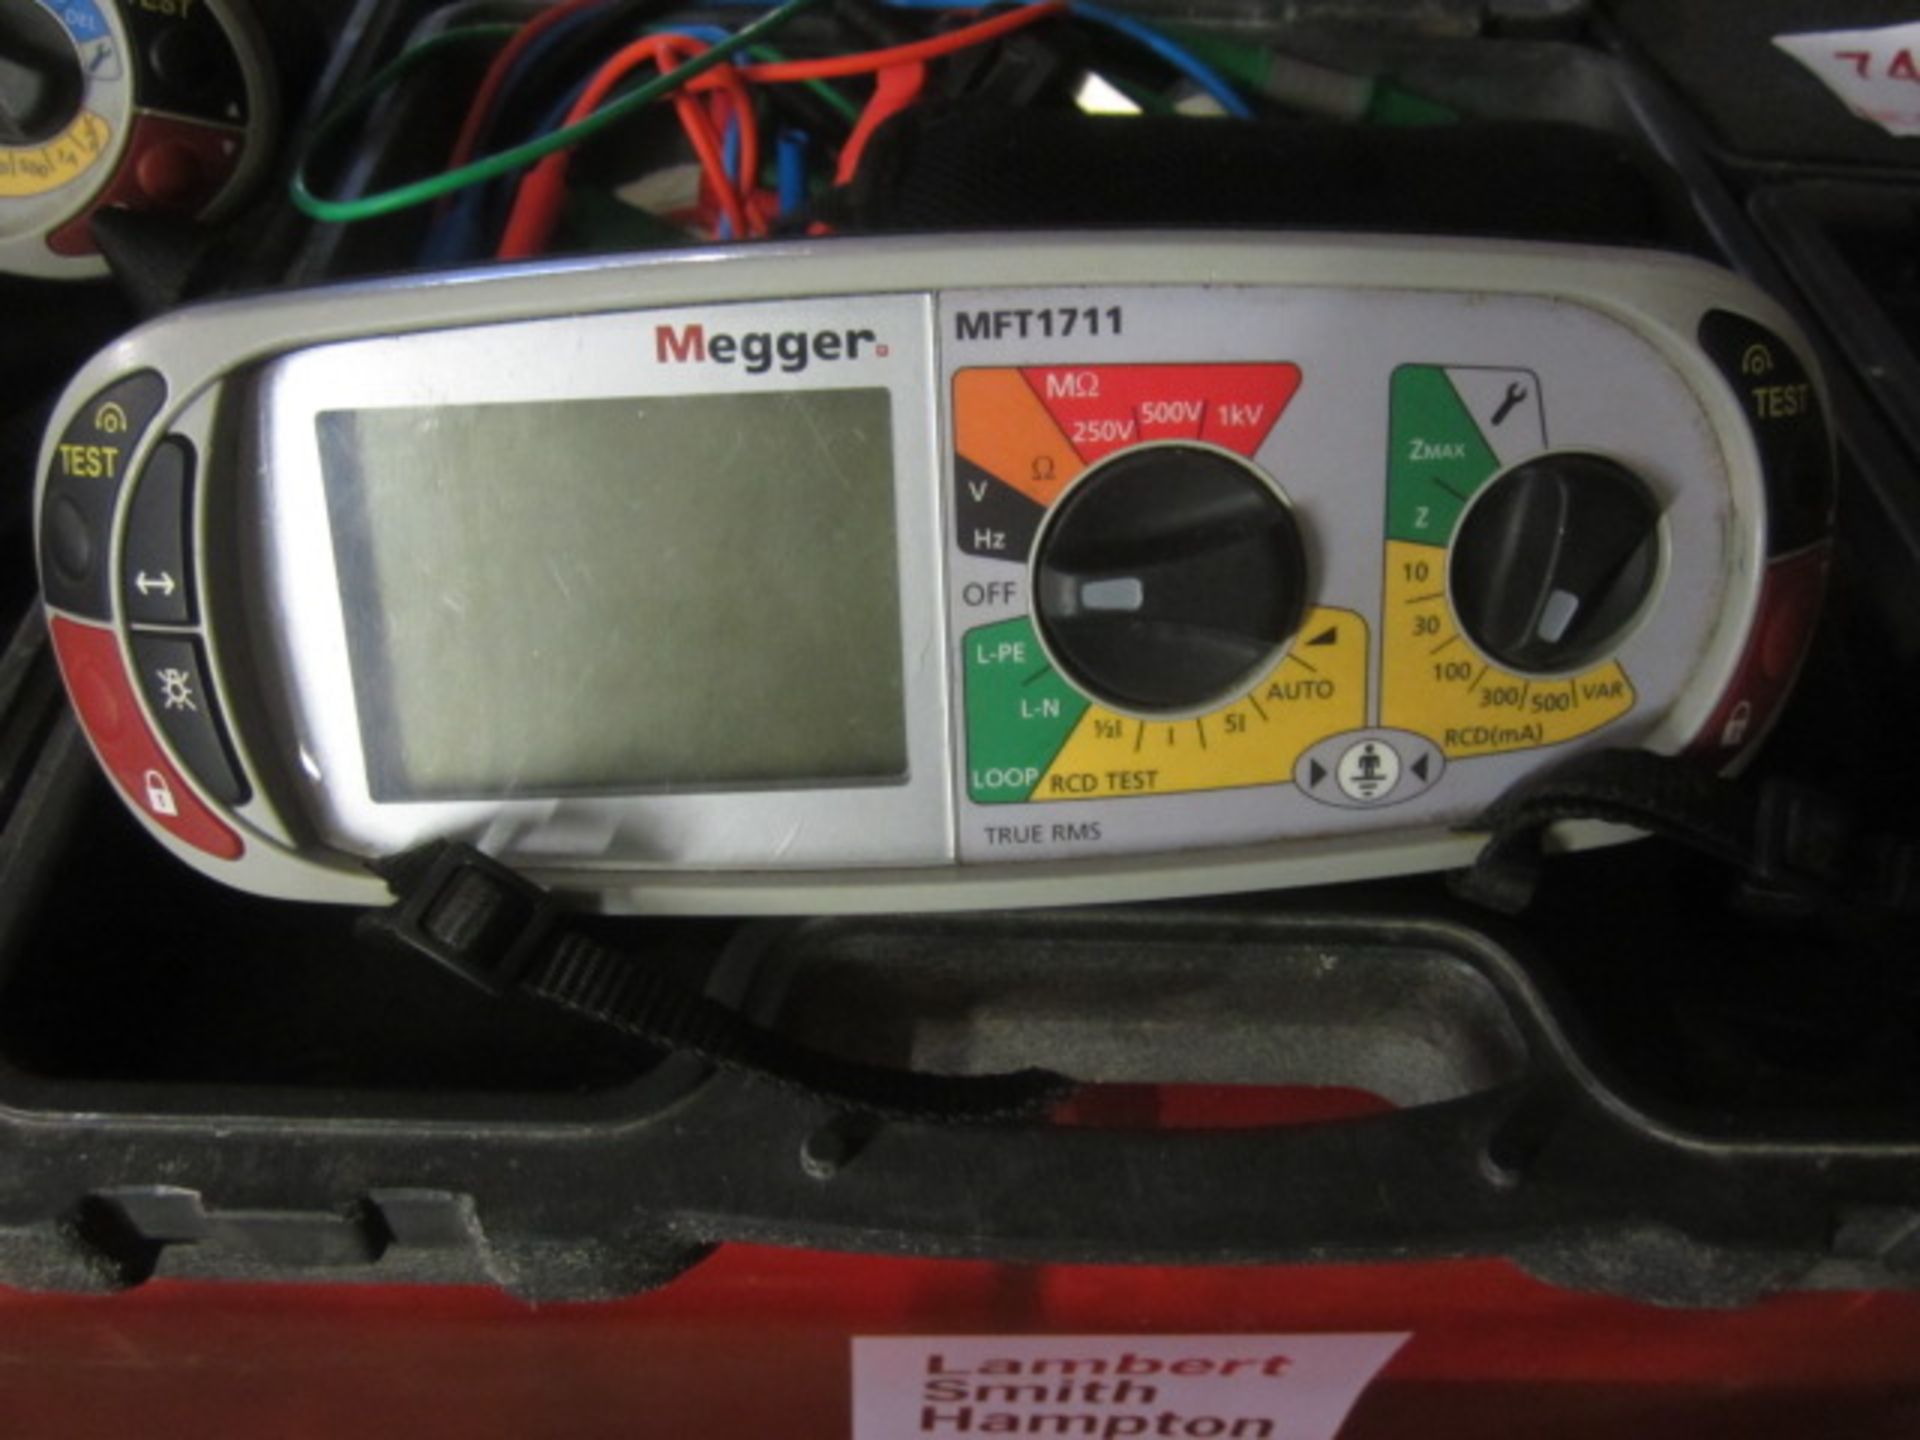 Megger MFT1711 electrical tester and associated cables ** Located: Stoneford Farm, Steamalong - Image 2 of 2